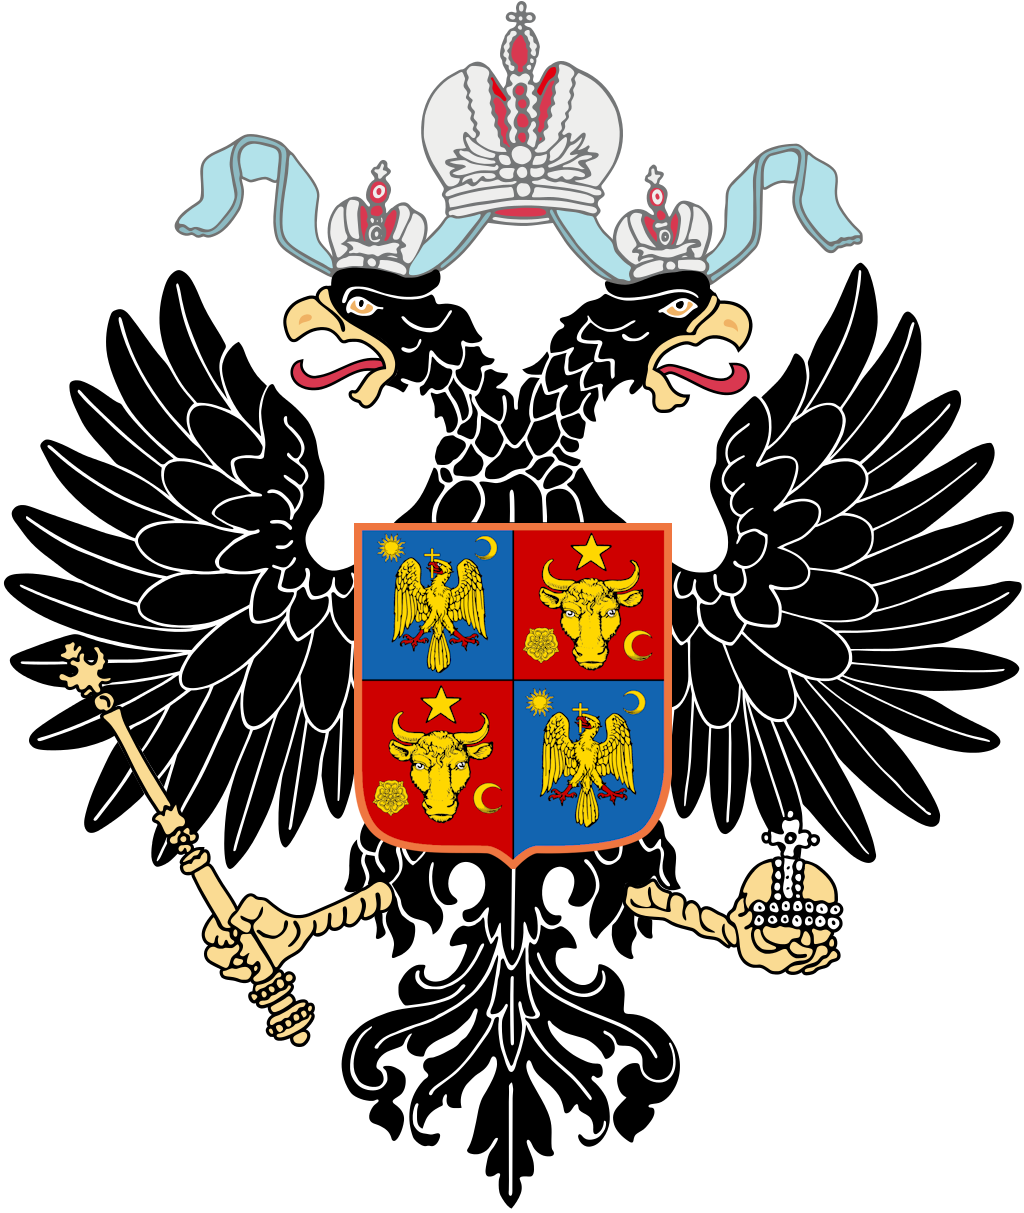 Tsardom of Russia coat of arms 1625-1721 by CTGonYT on DeviantArt